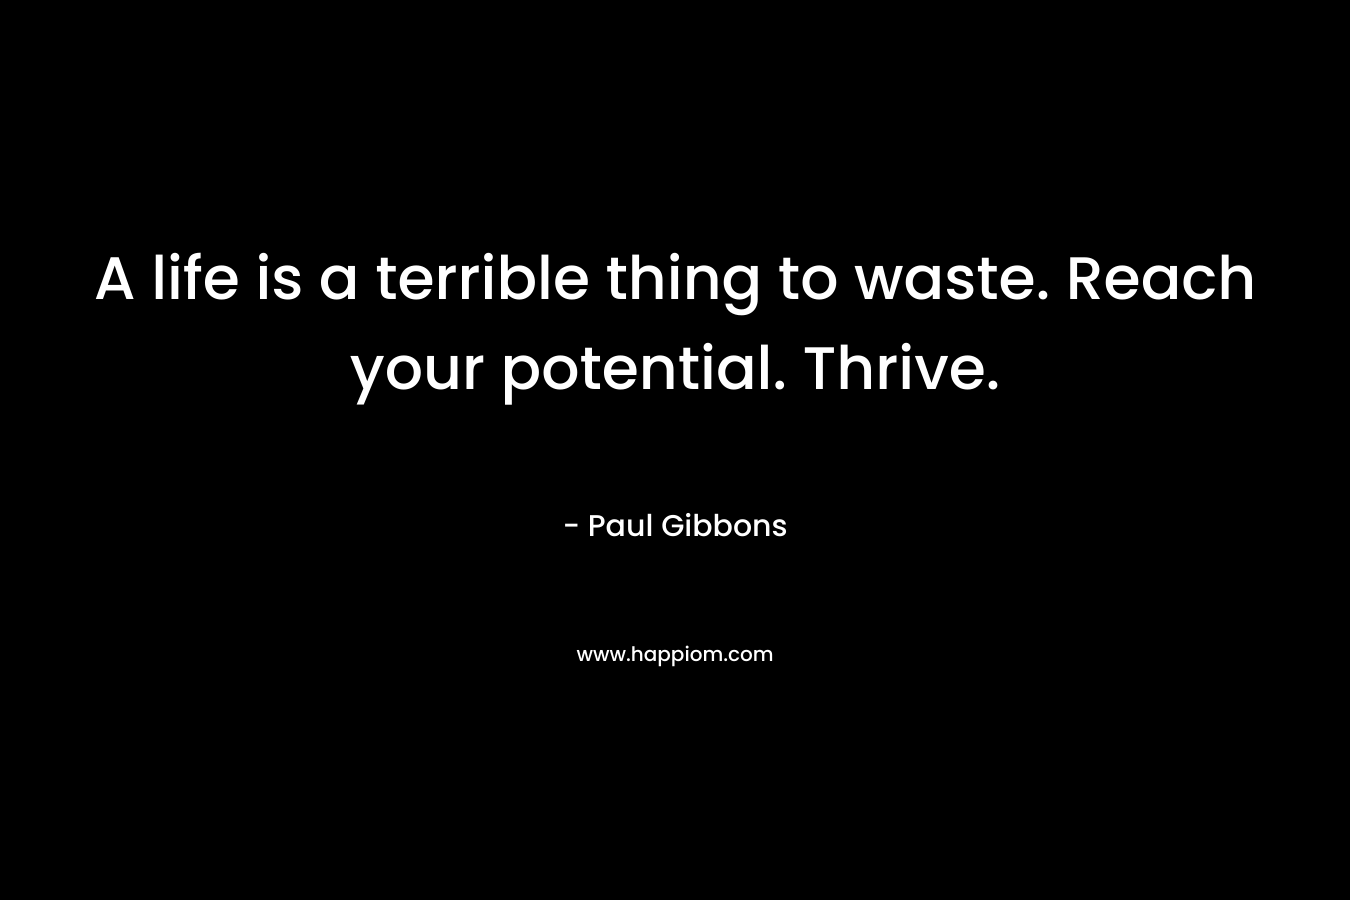 A life is a terrible thing to waste. Reach your potential. Thrive.